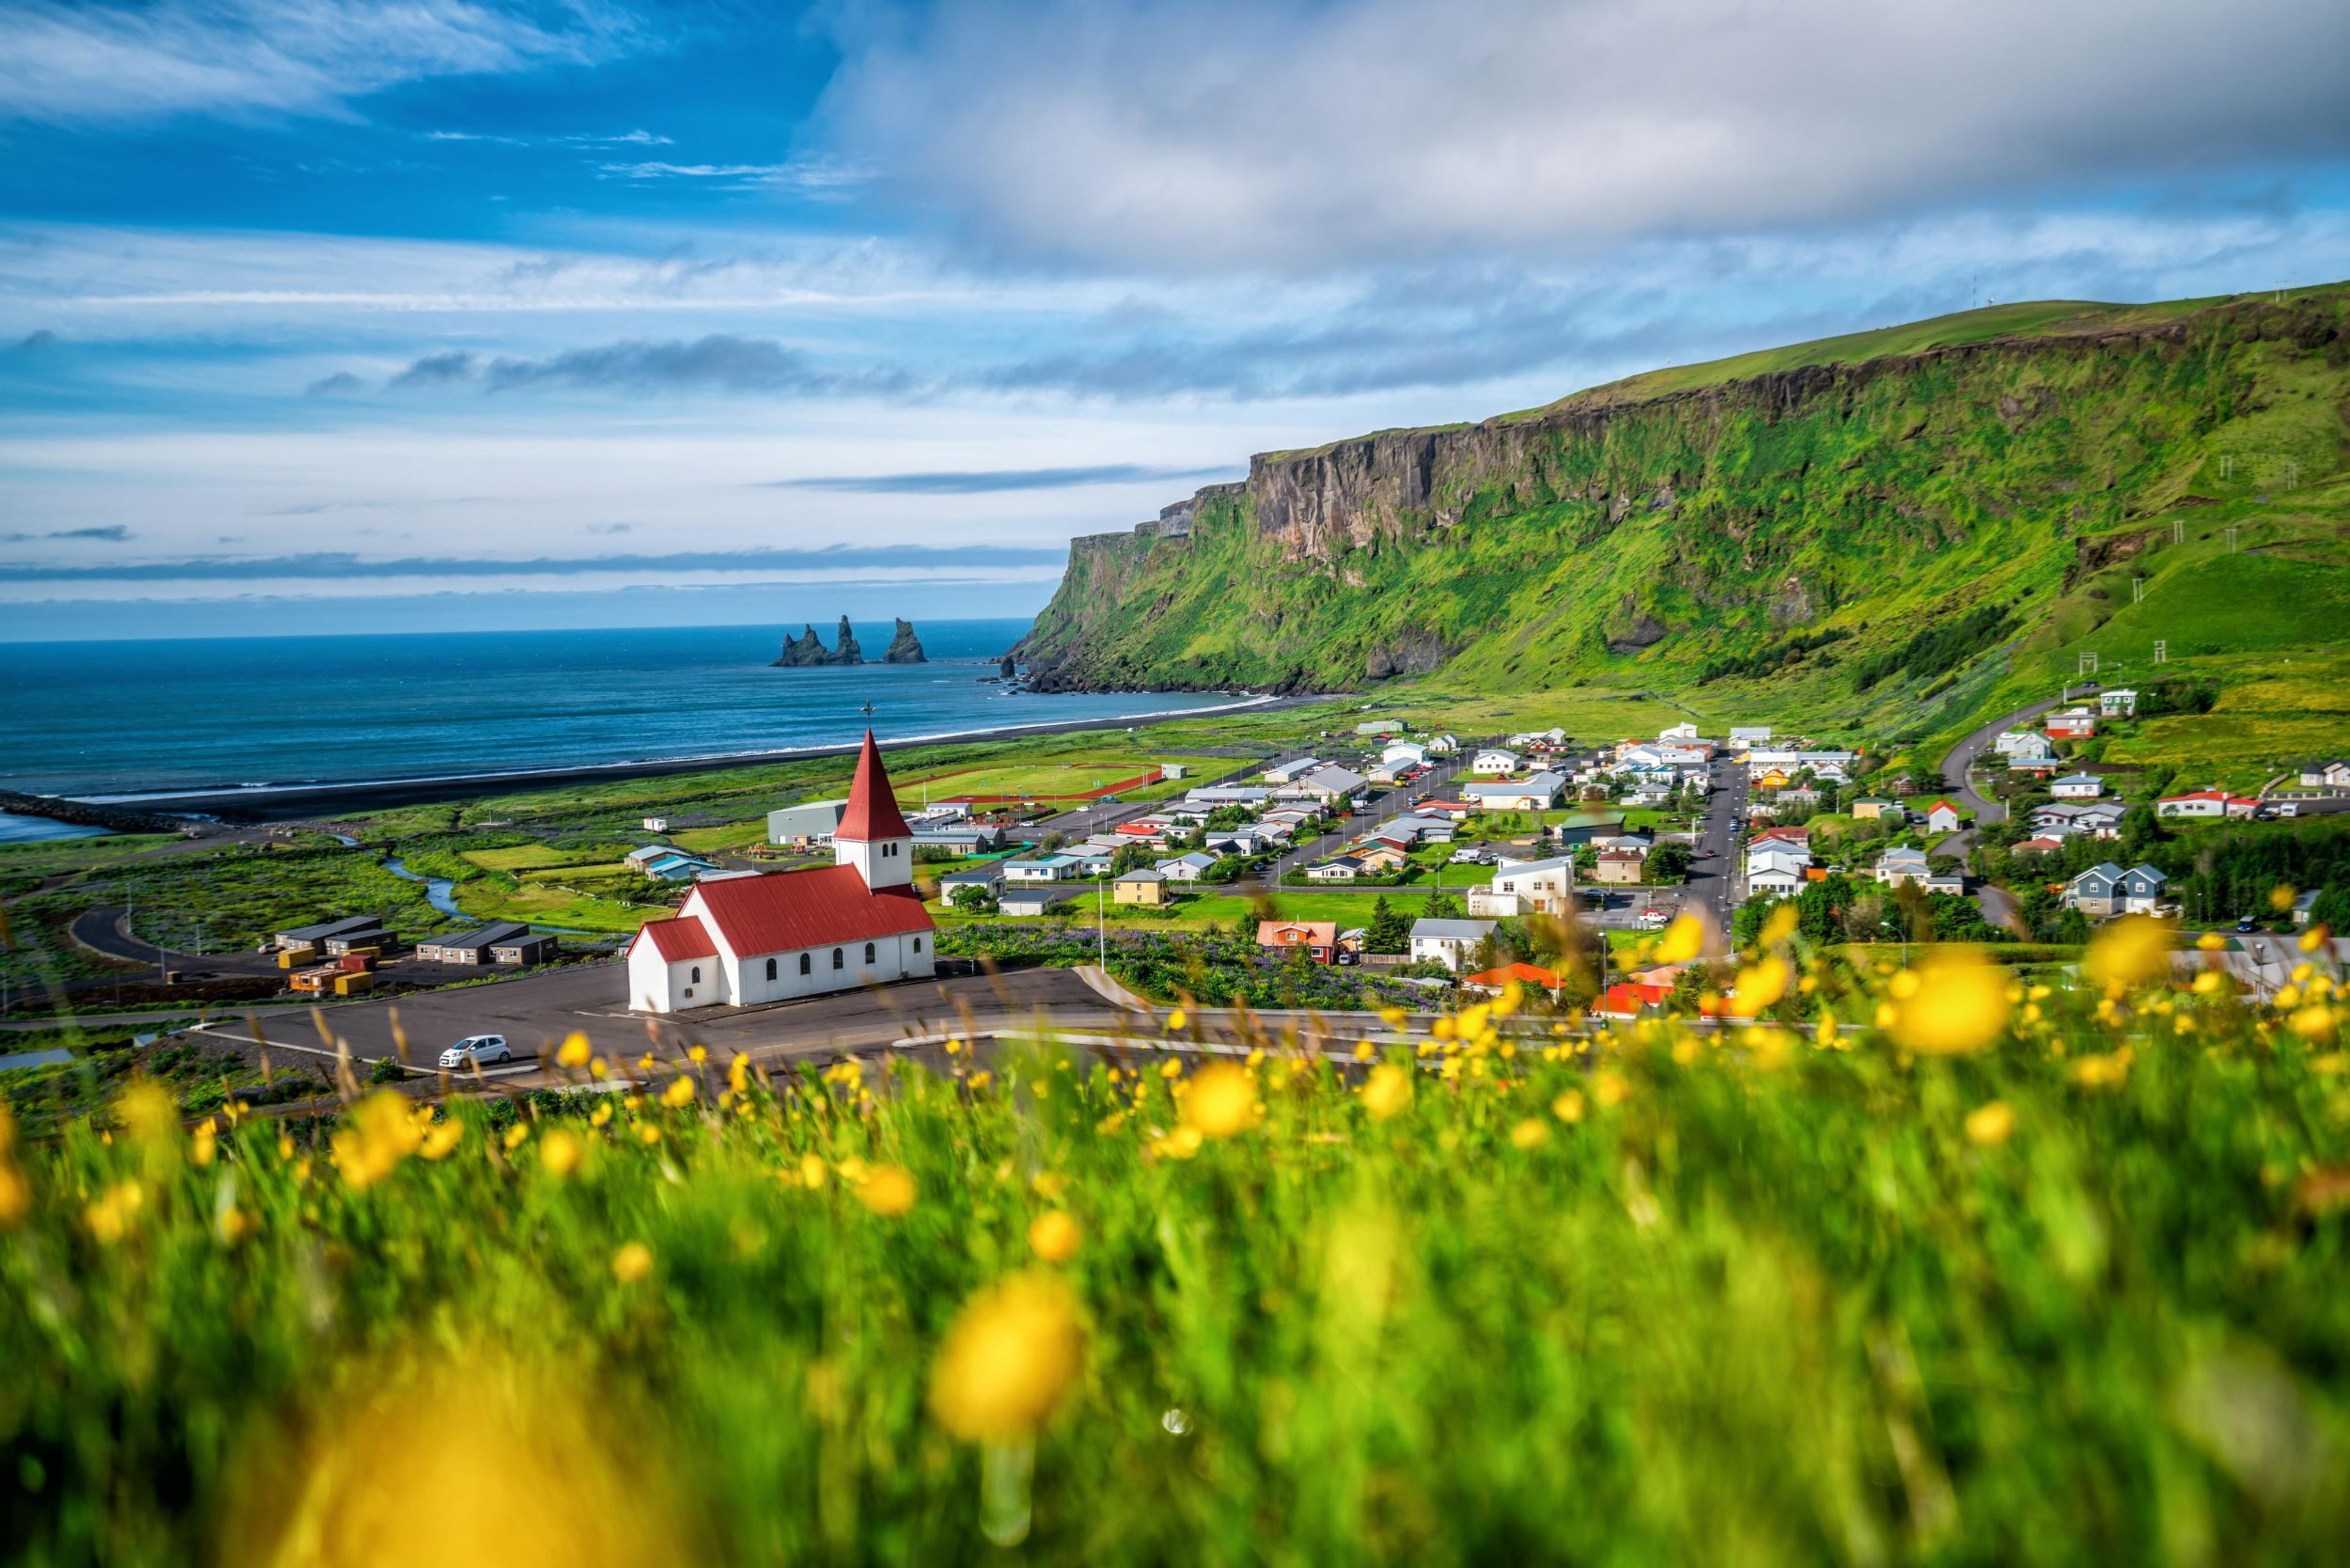 Quaint red-roofed church amidst a lush green landscape speckled with yellow flowers, with the contrasting black sand beach and sea stacks looming in the background.